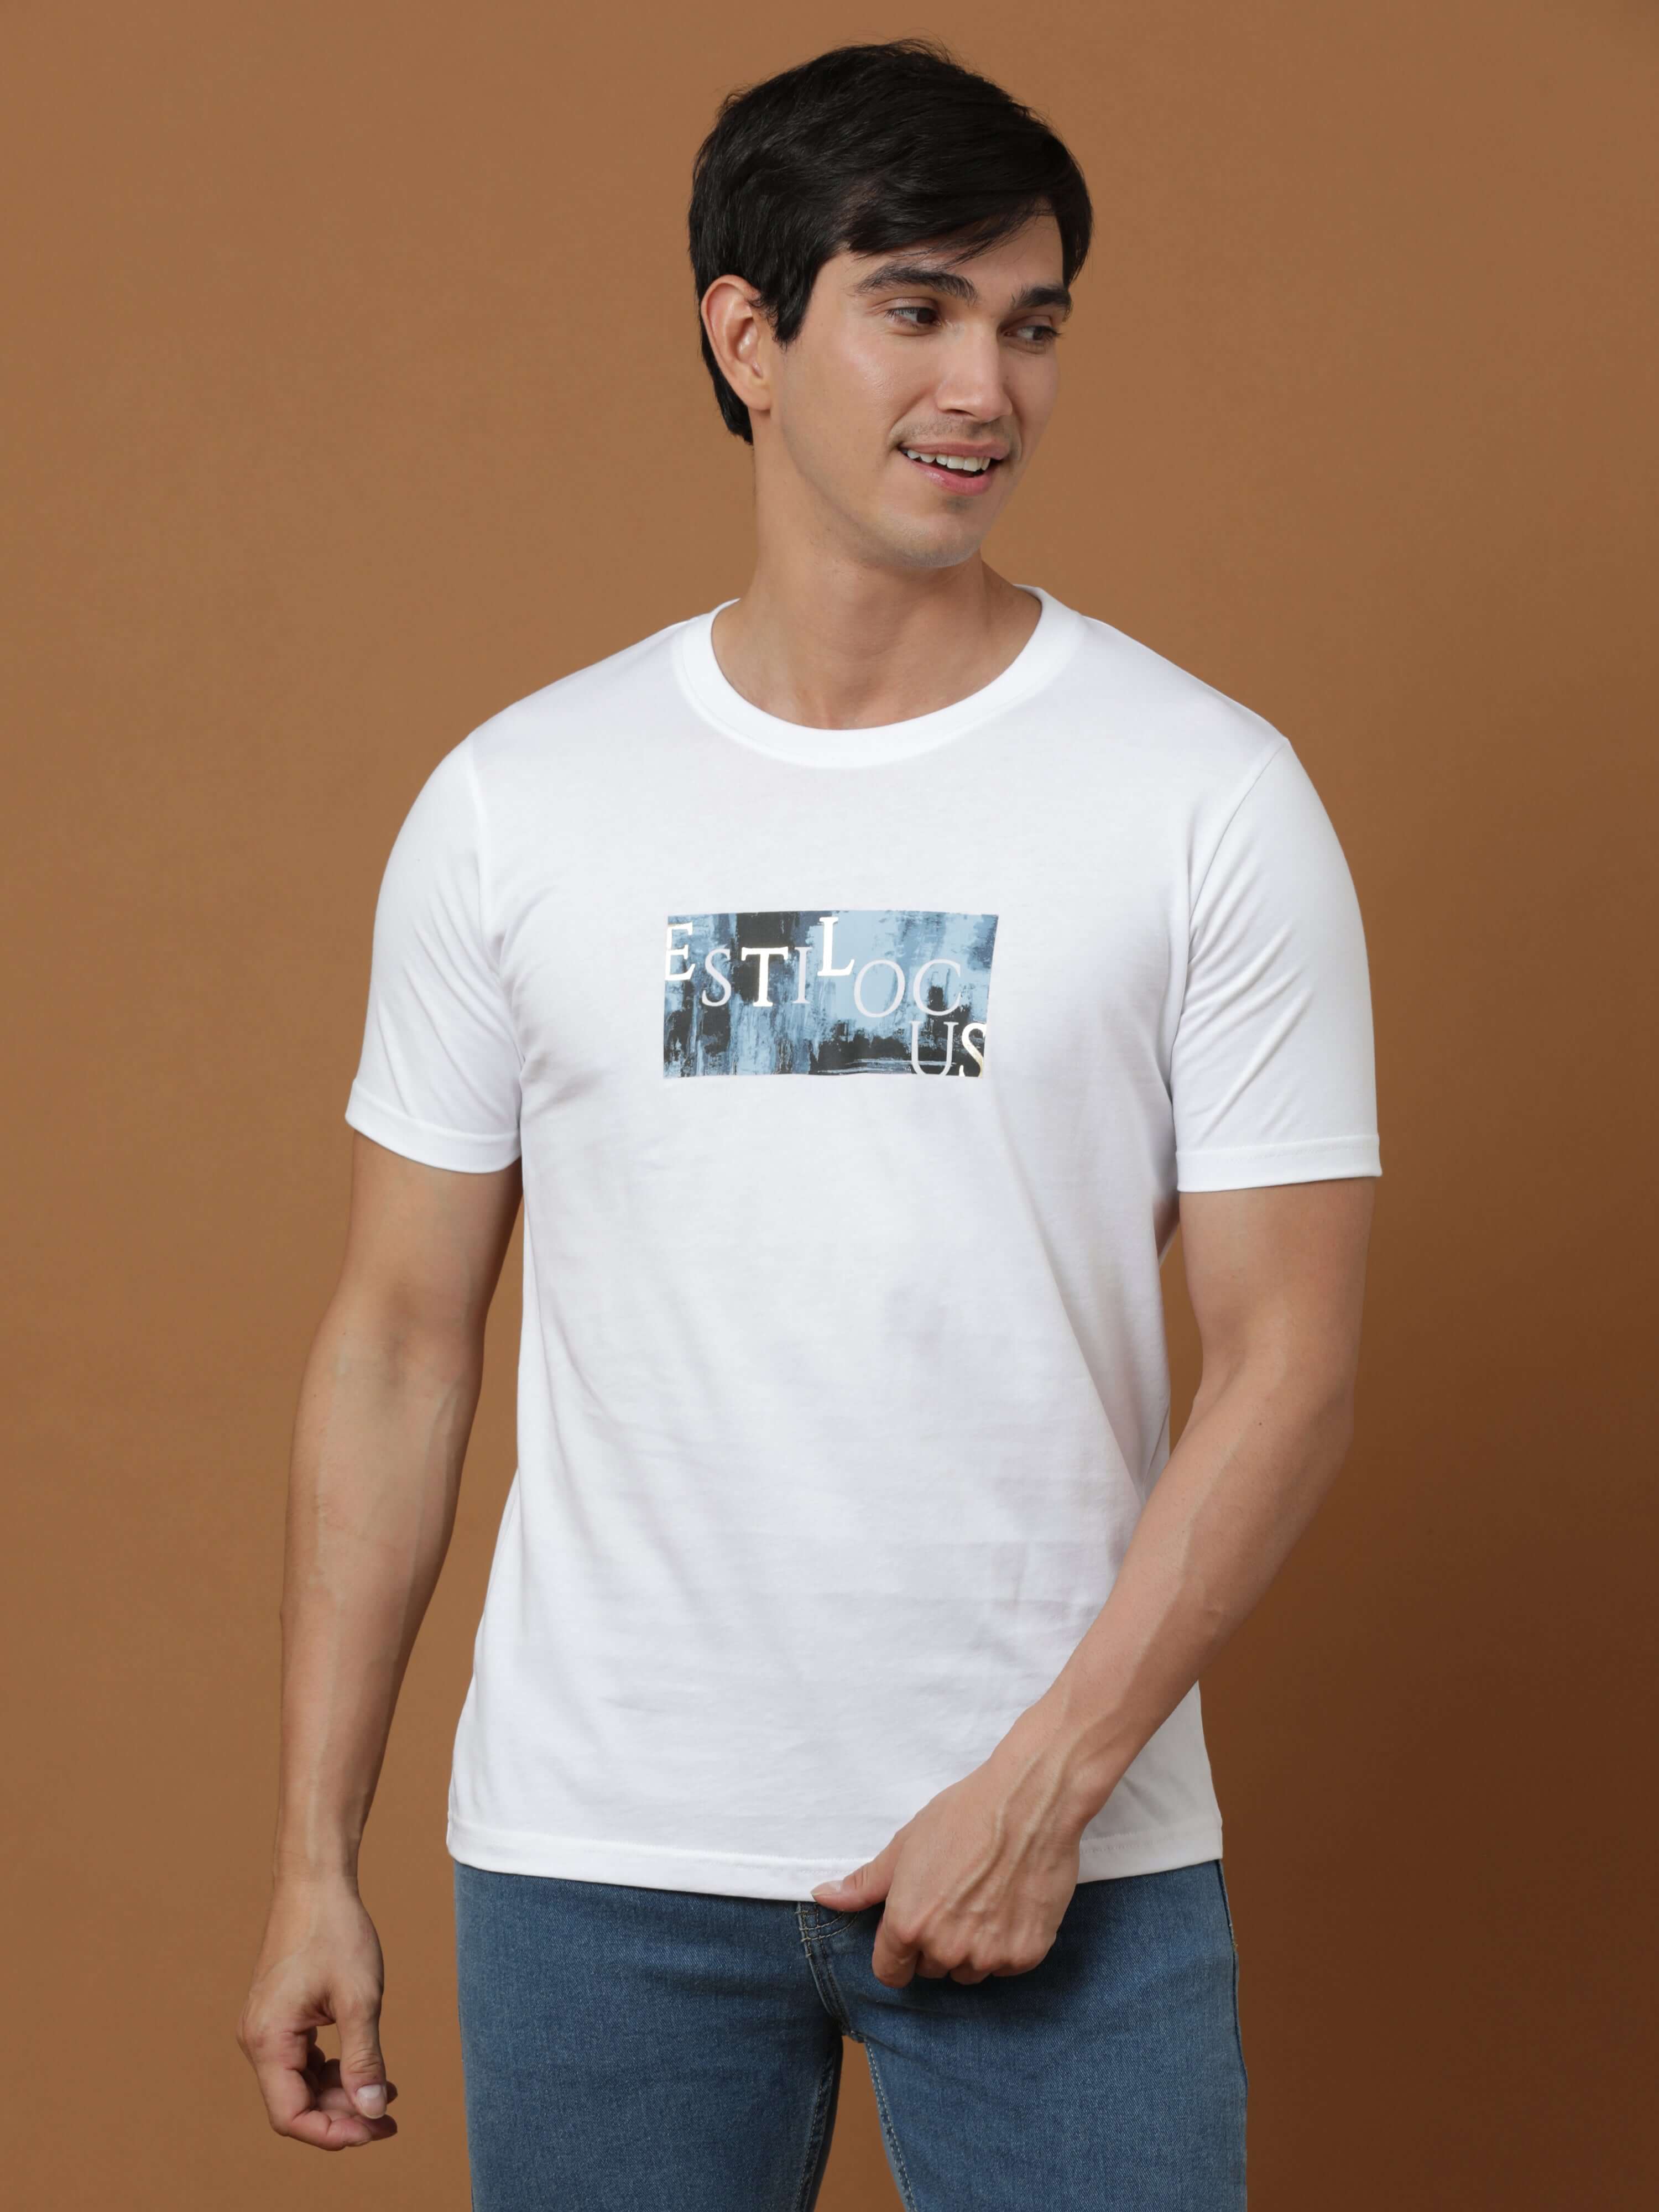 Vintage White Printed T Shirt shop online at Estilocus. 100% Cotton Designed and printed on knitted fabric. The fabric is stretchy and lightweight, with a soft skin feel and no wrinkles. Crew neck collar which is smooth on the neck and keeps you comfortab